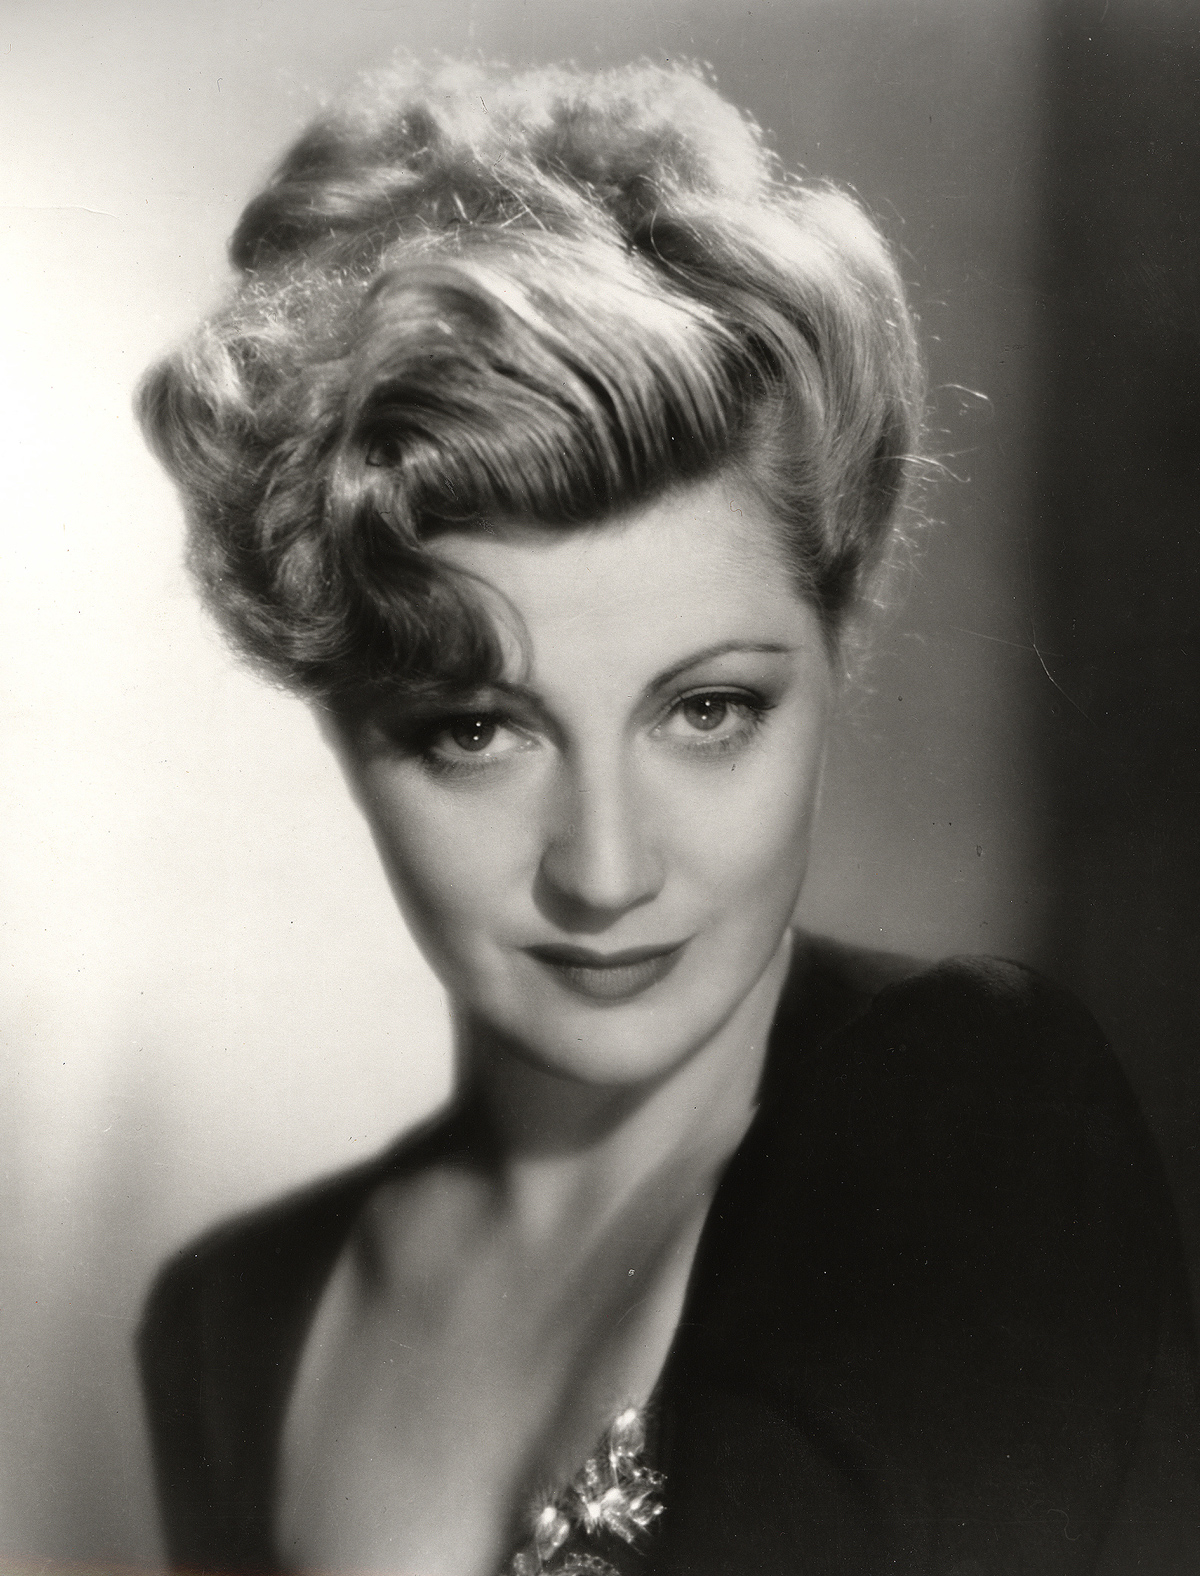 Stella Adler. This publicity photograph was probably taken in 1937, the year Stella's first film "Love On Toast" was released.